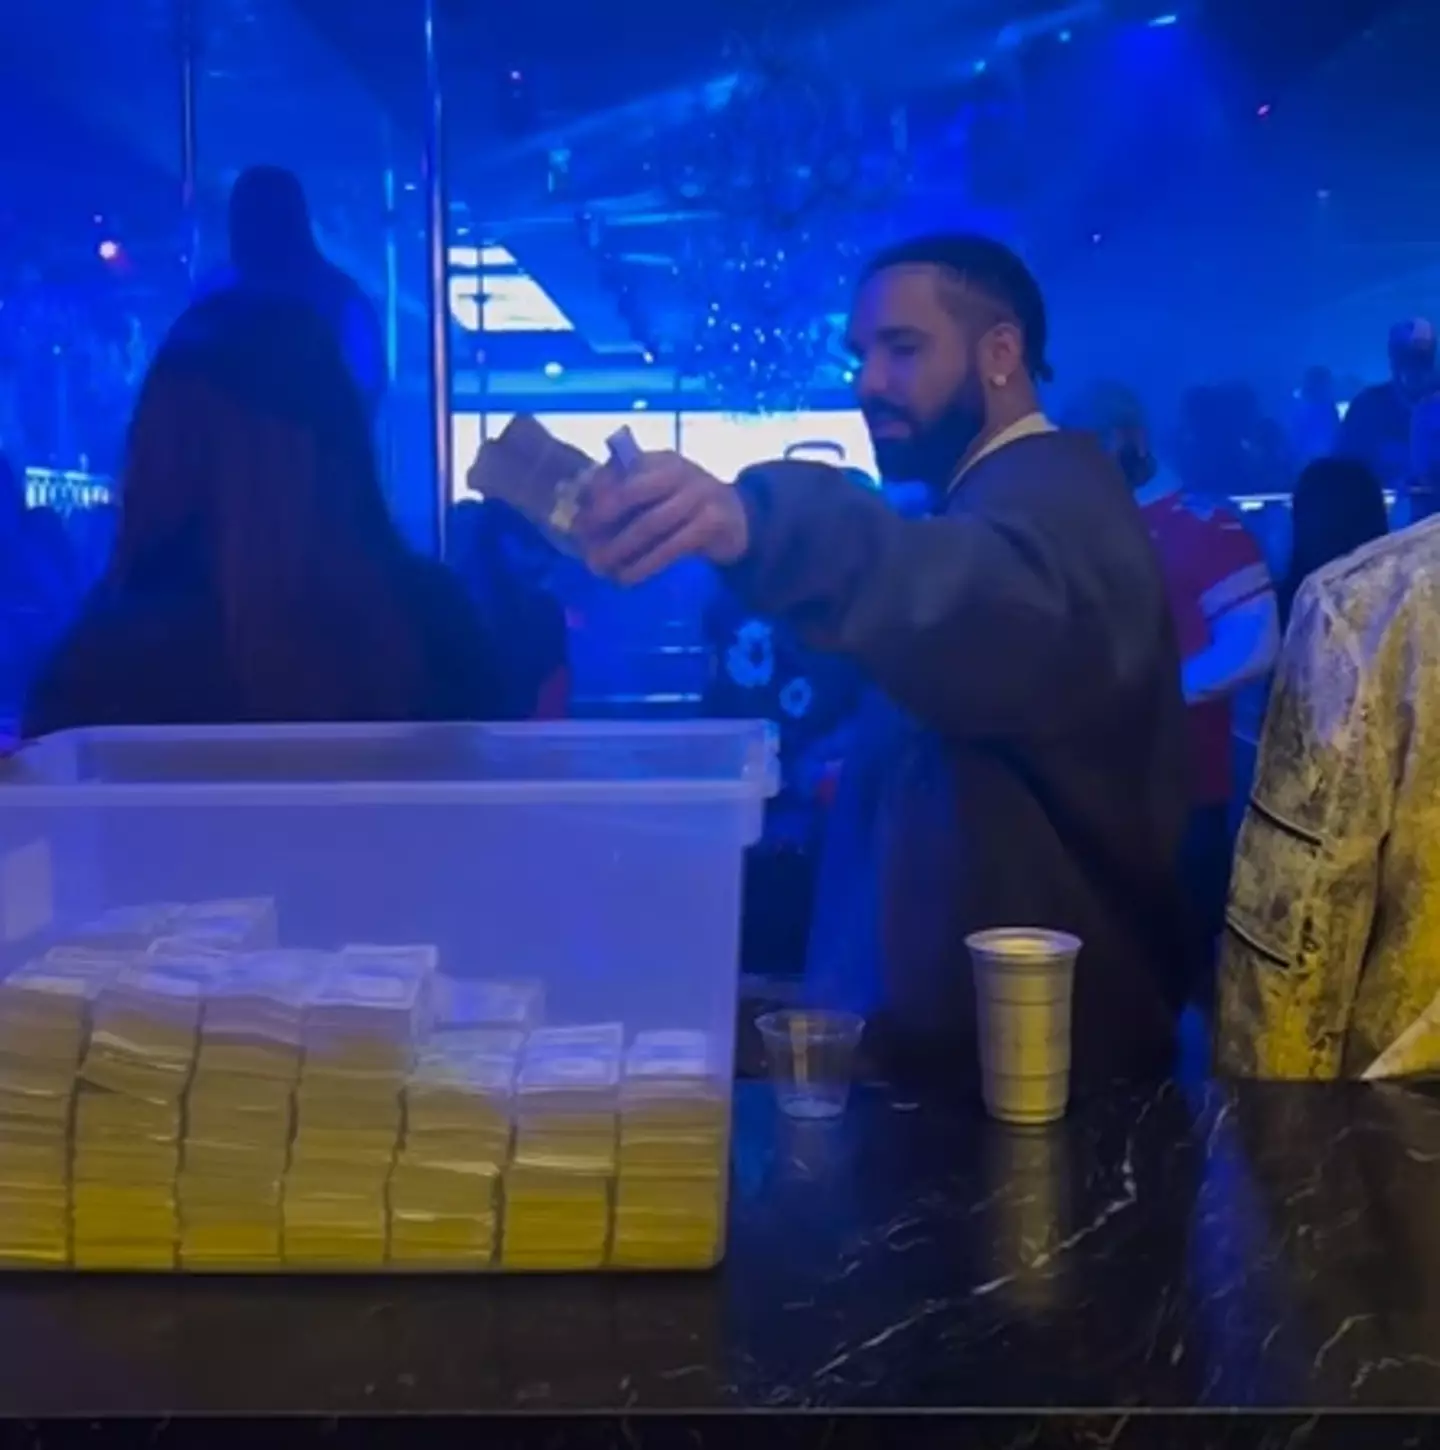 Walk into the club like 'what up, I got a big box full of money'.